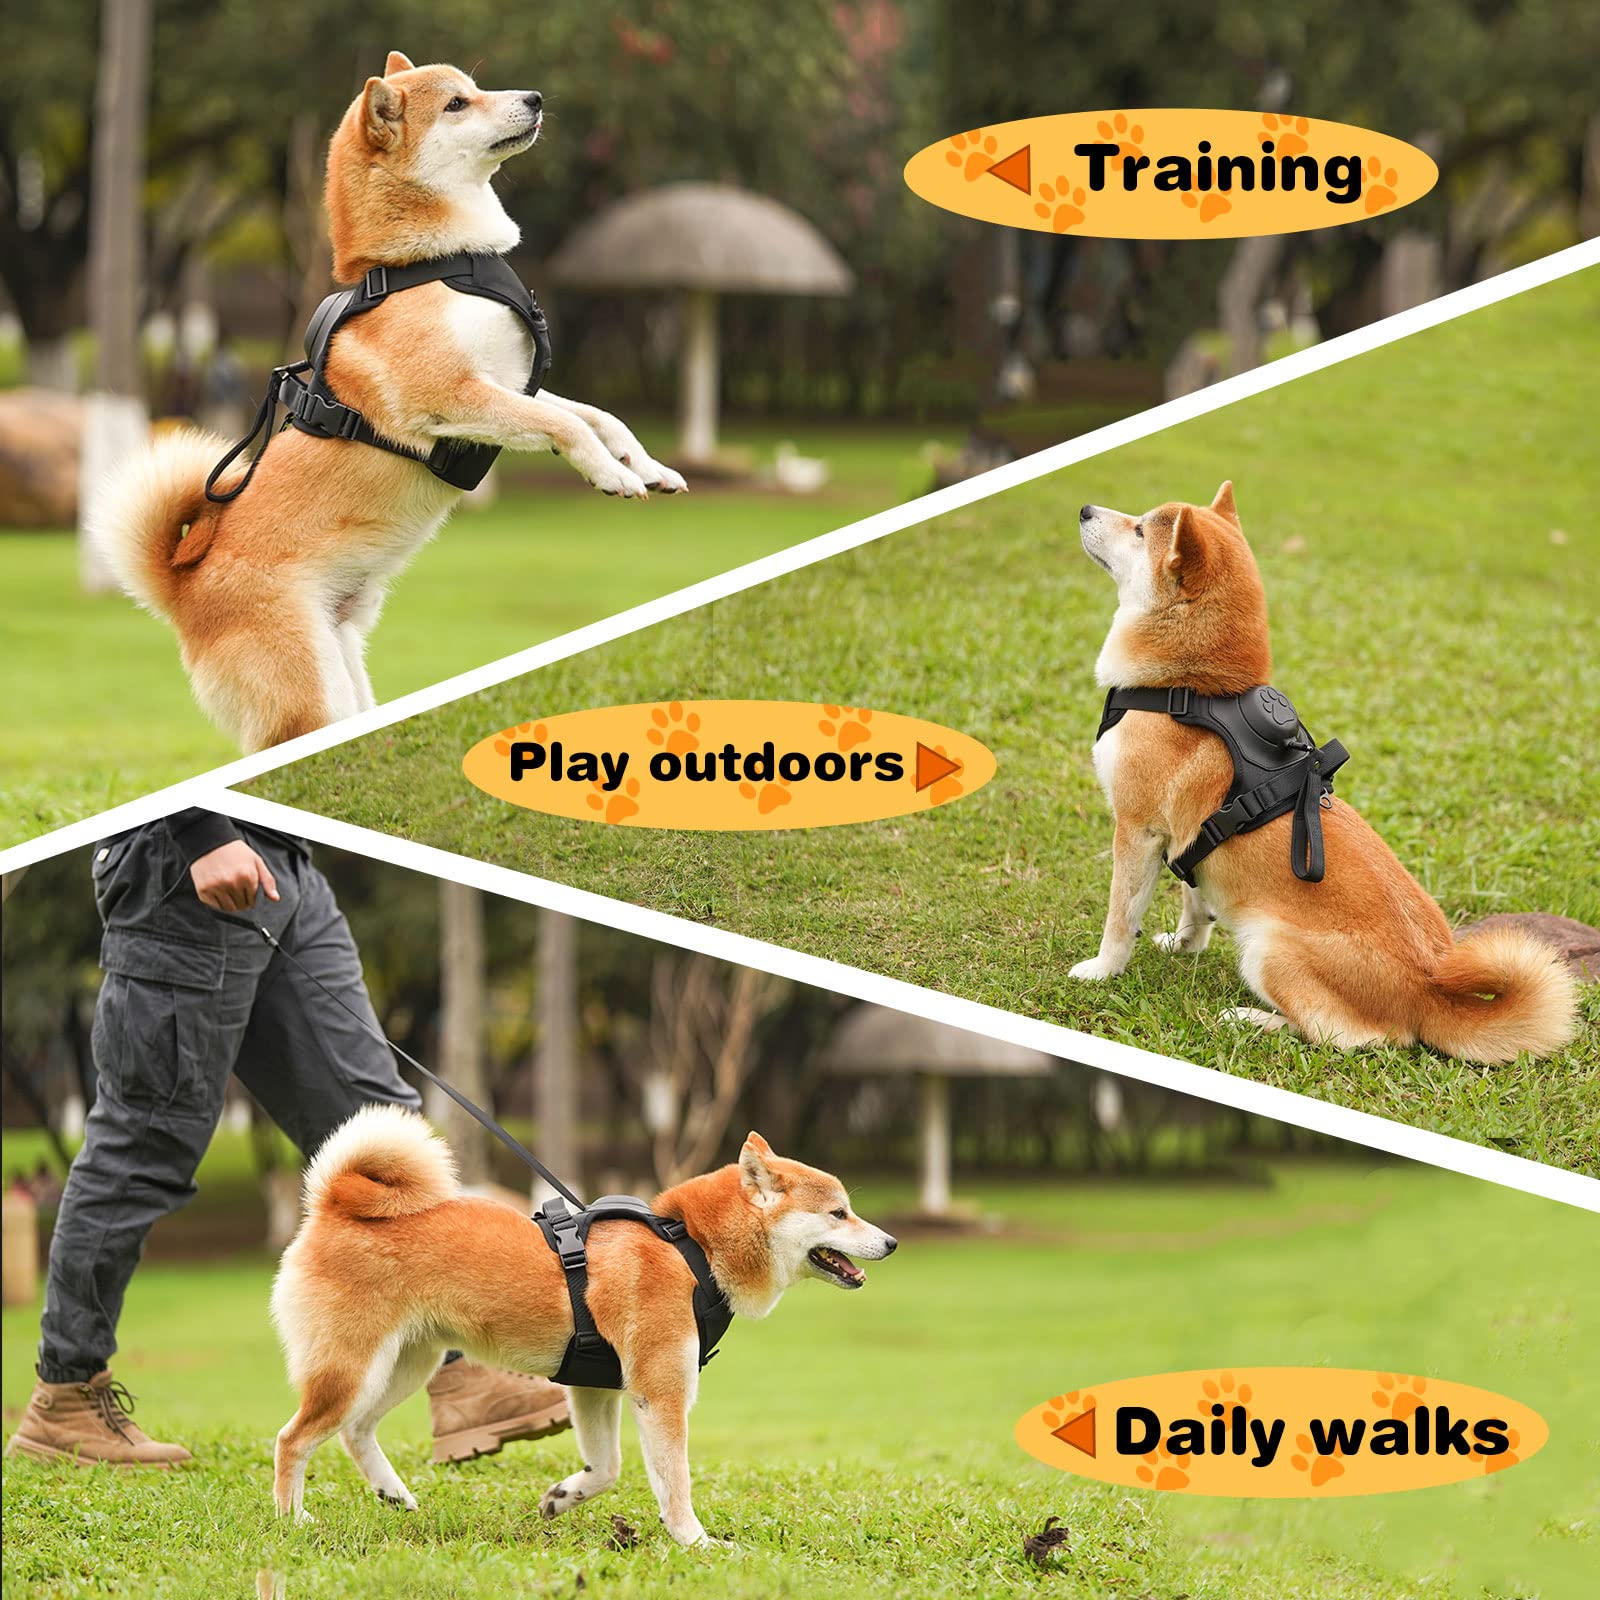 🔥2023 HOT SALE - Dog Harness and Retractable Leash Set All-in-One